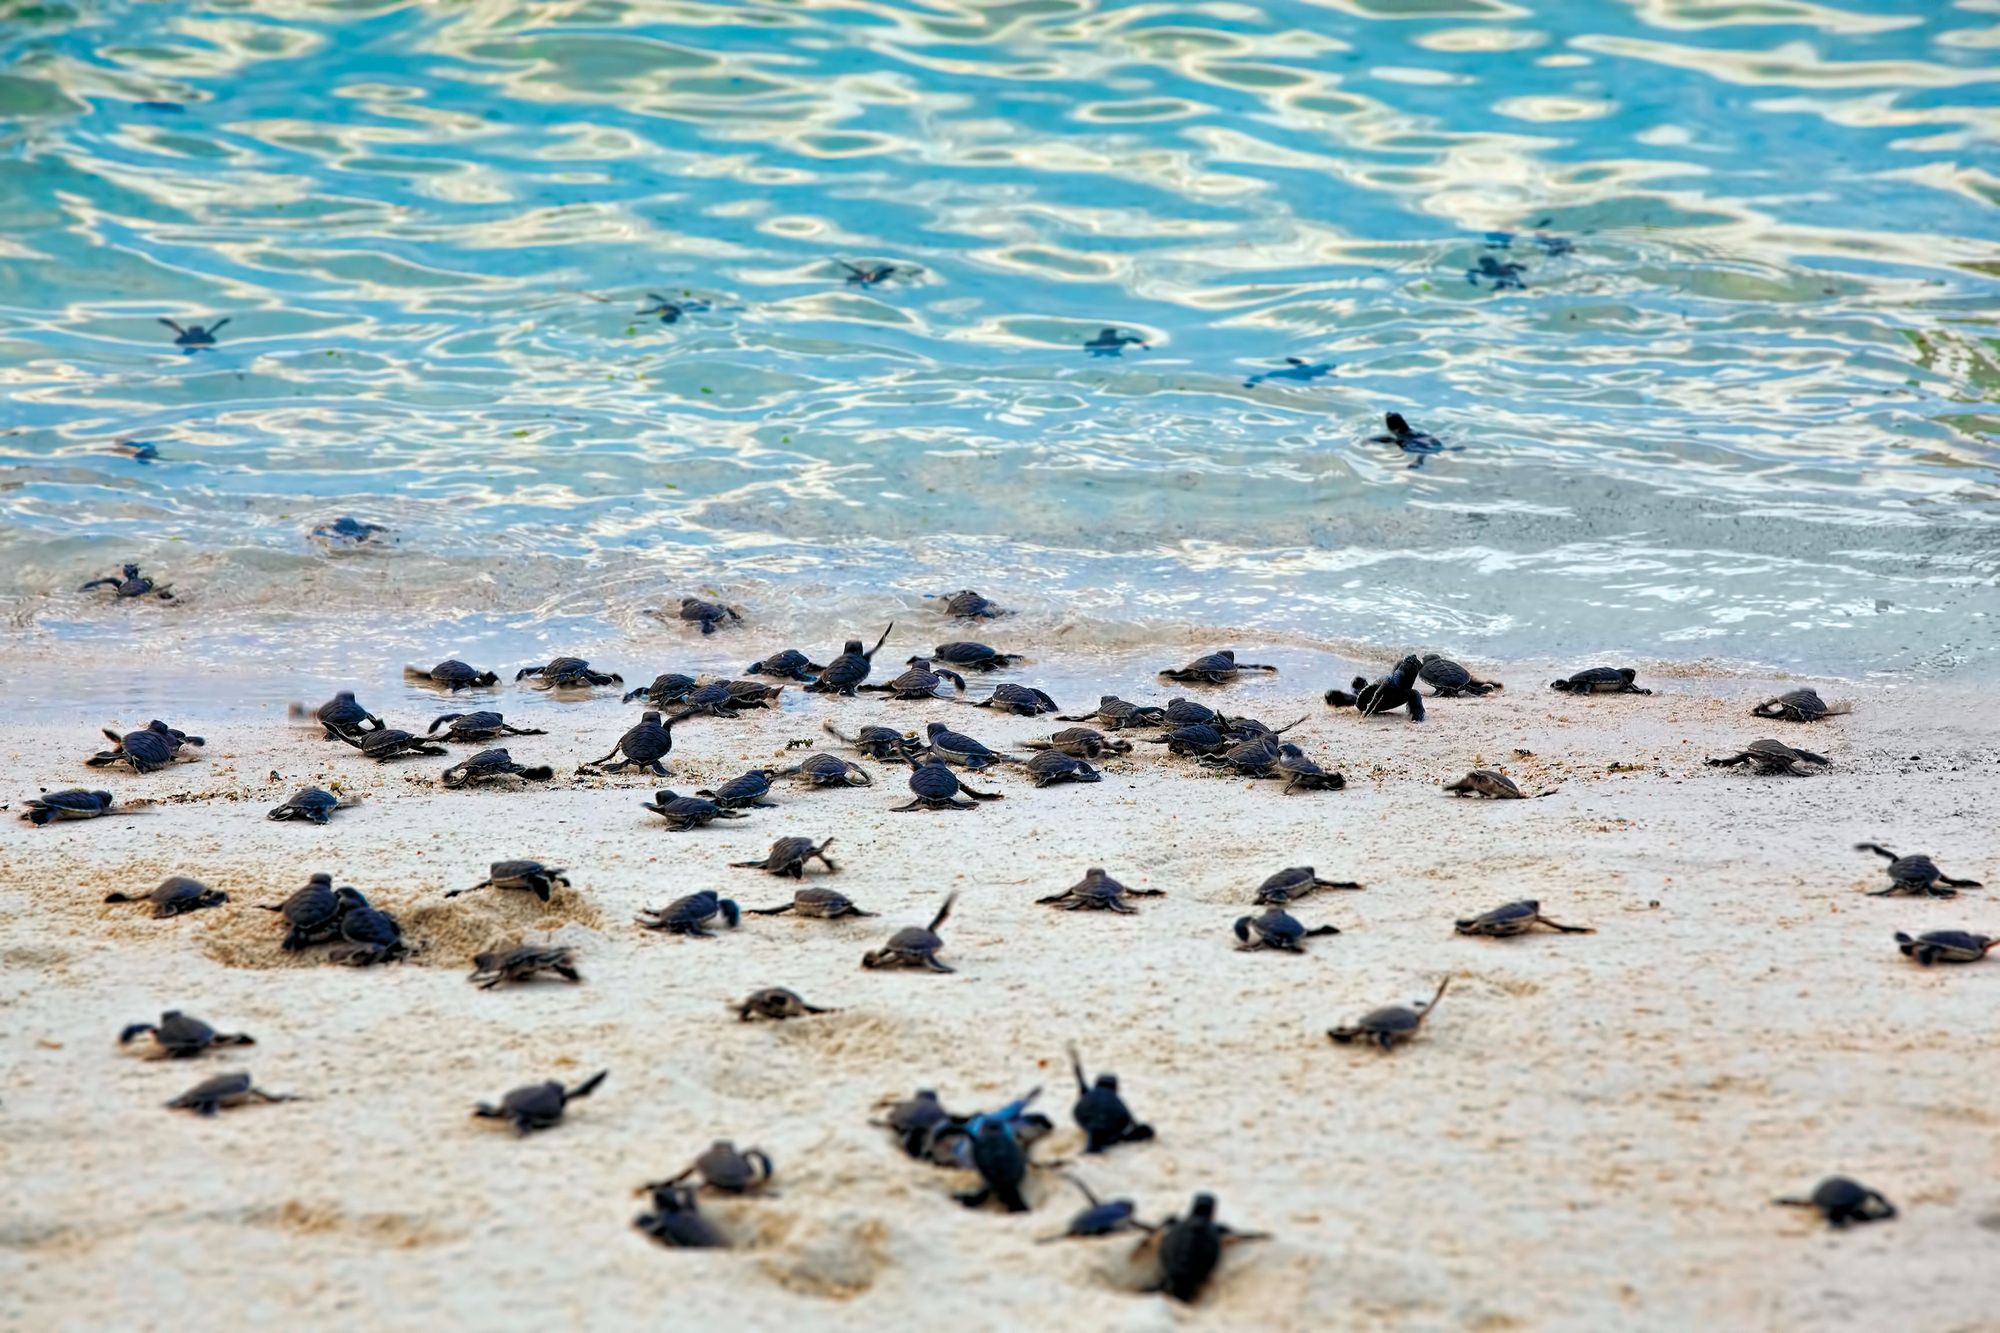 A group of small sea turtles make their way to the water after hatching, on a beach in Borneo. Photo: Getty